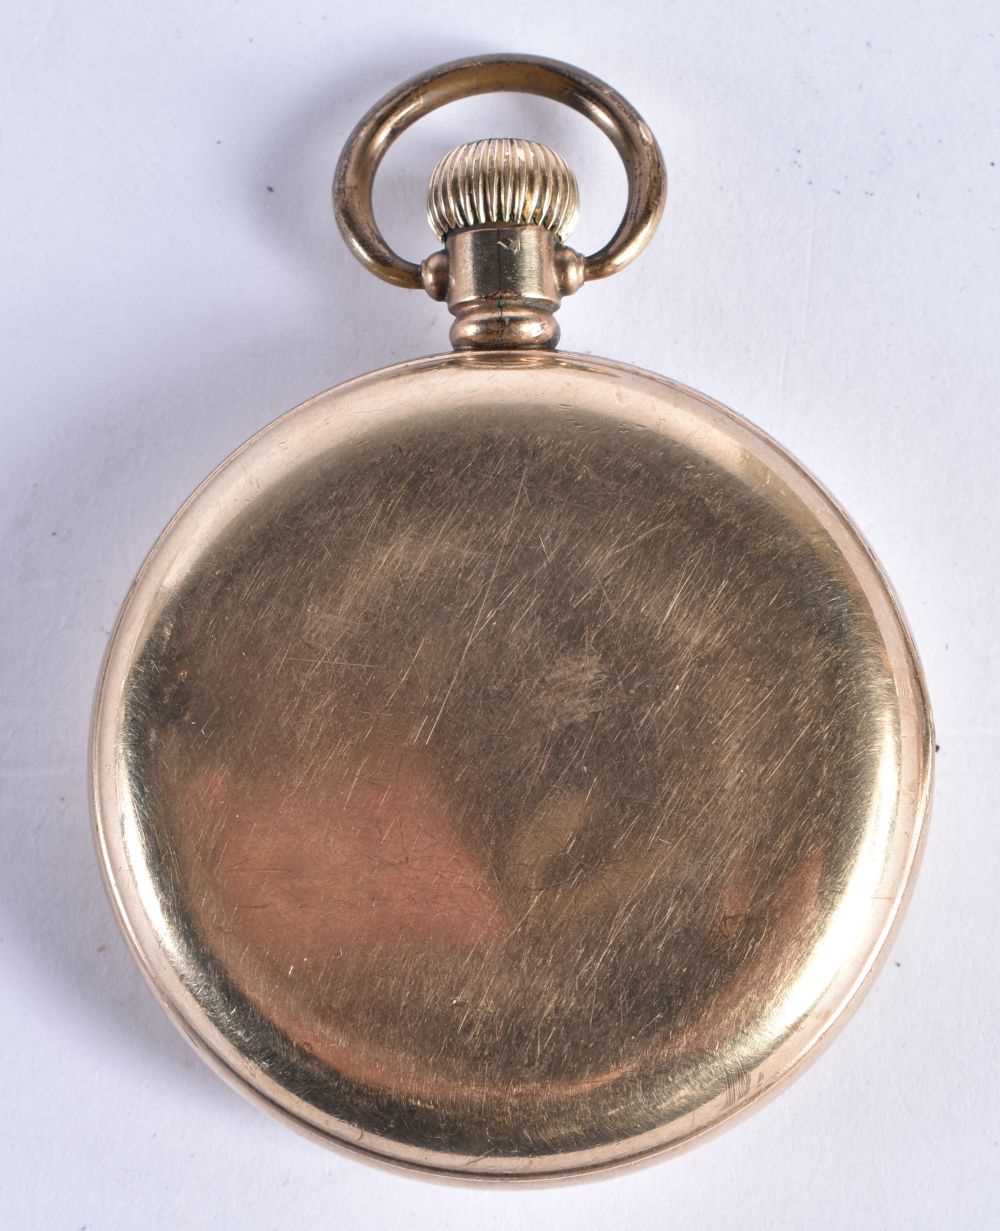 SMITHS Rolled Gold Gents Vintage Open Face Pocket Watch.   Movement - Hand-wind.  WORKING - Tested - Image 4 of 4